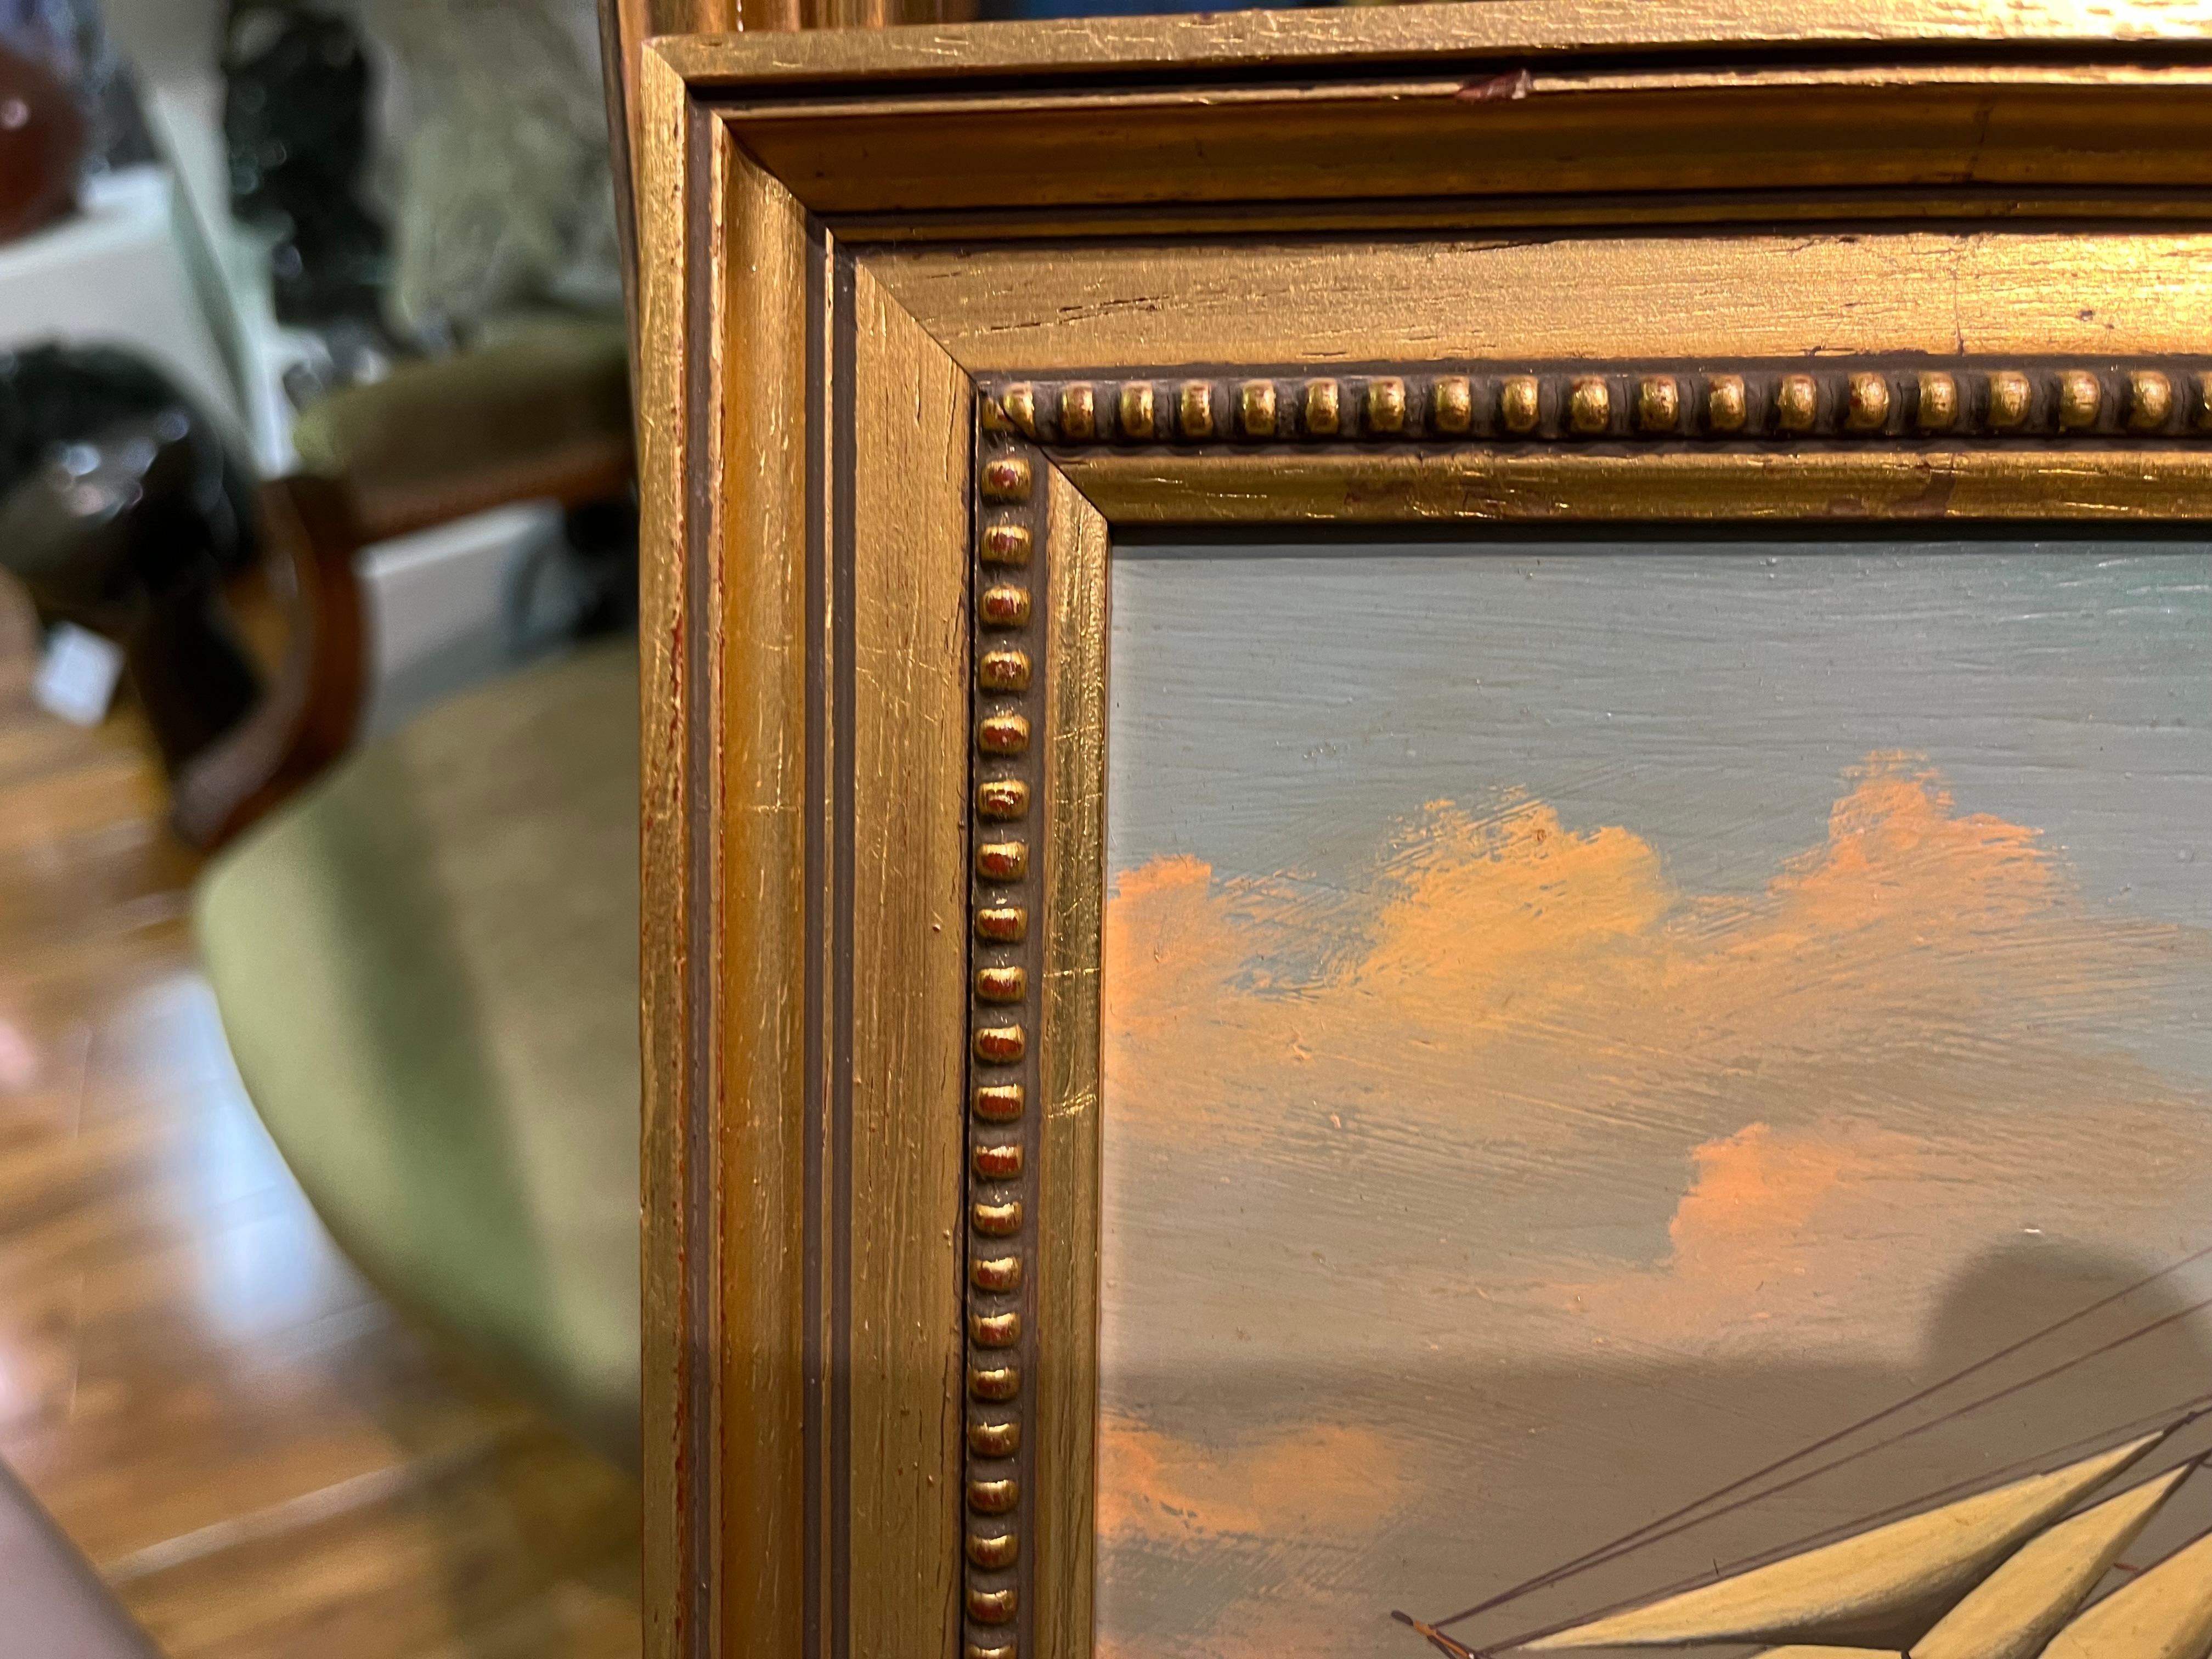 OIL PAINTING SMALL  SALVATORE COLACICCO (NAVY ADMIRALTY 20th CENTURY

Very good condition for age , (see pictures)

FINE RARE MARTINE PAINTING ORIGINAL

20th Century OLD MASTER STYLE OIL PAINTING GOLD GILT FRAME

By Similar $3,000 Premier